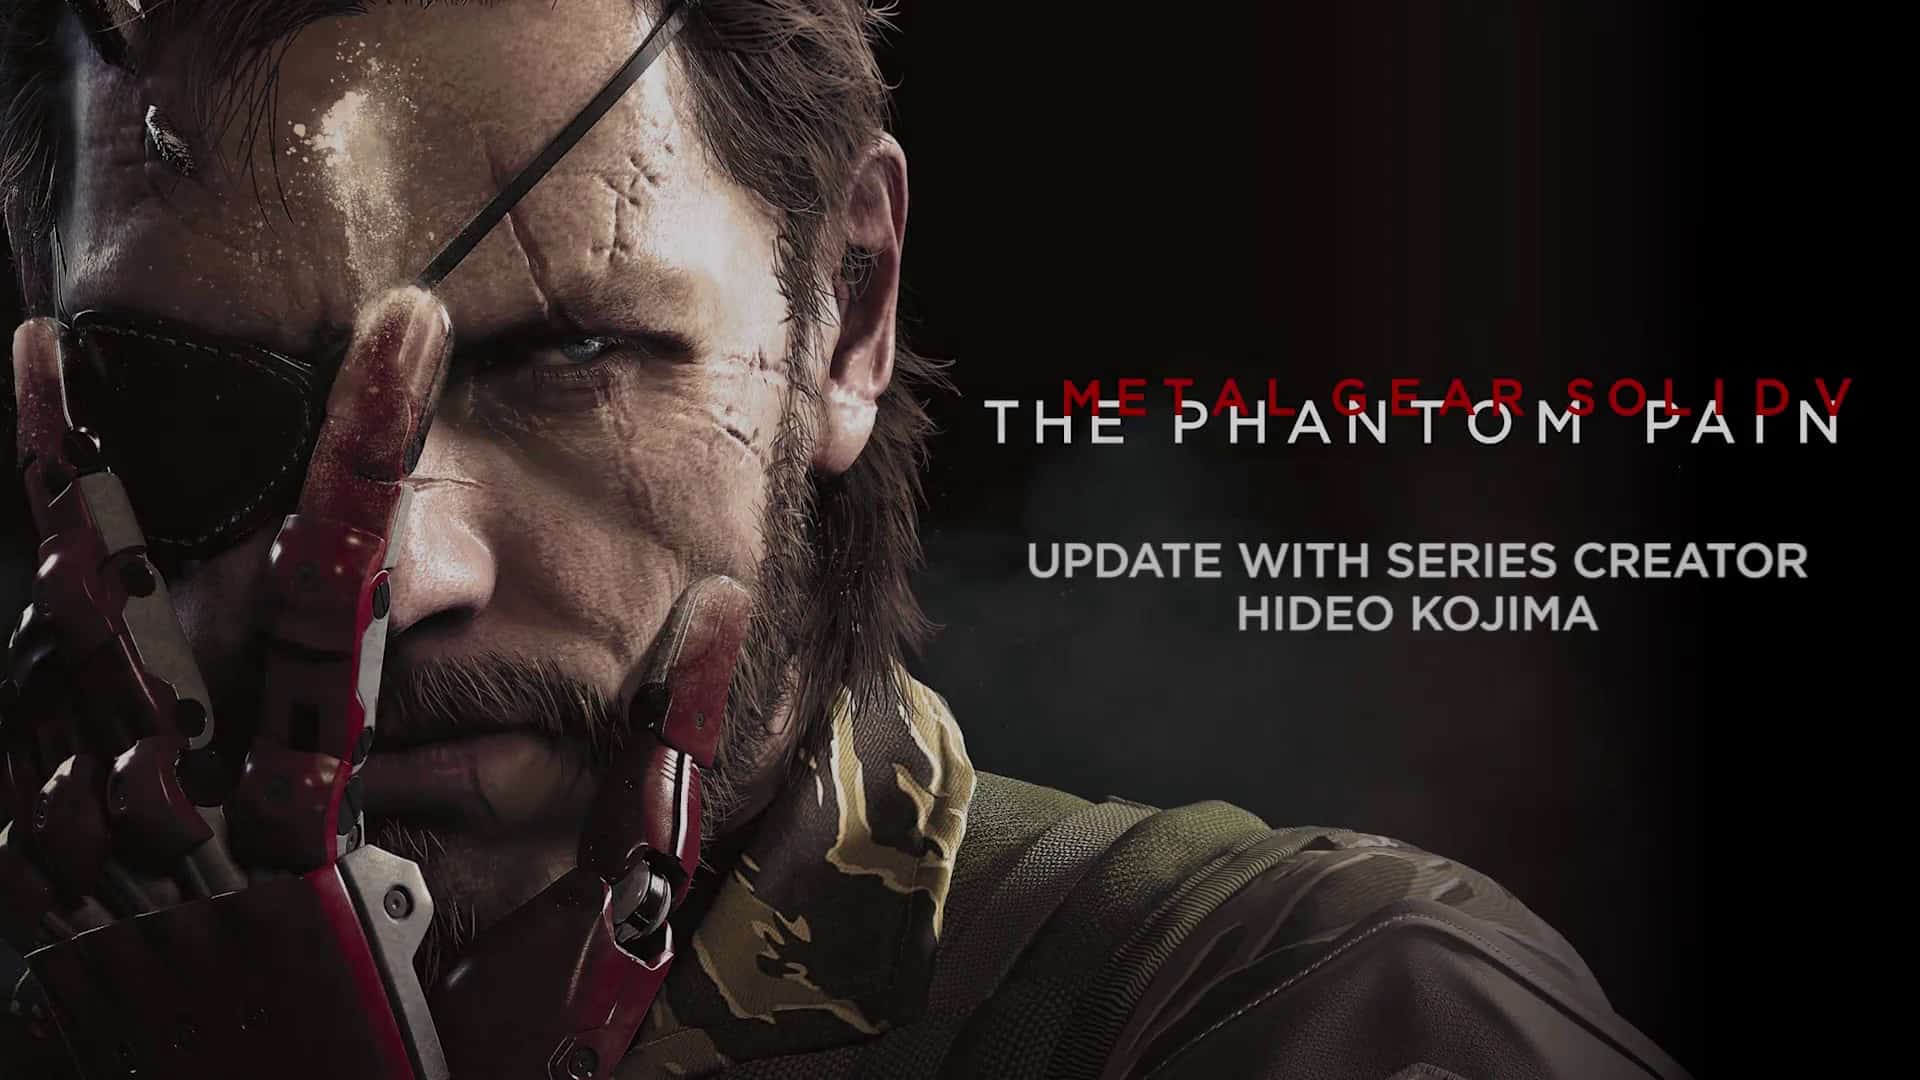 metal gear solid 5 free assets